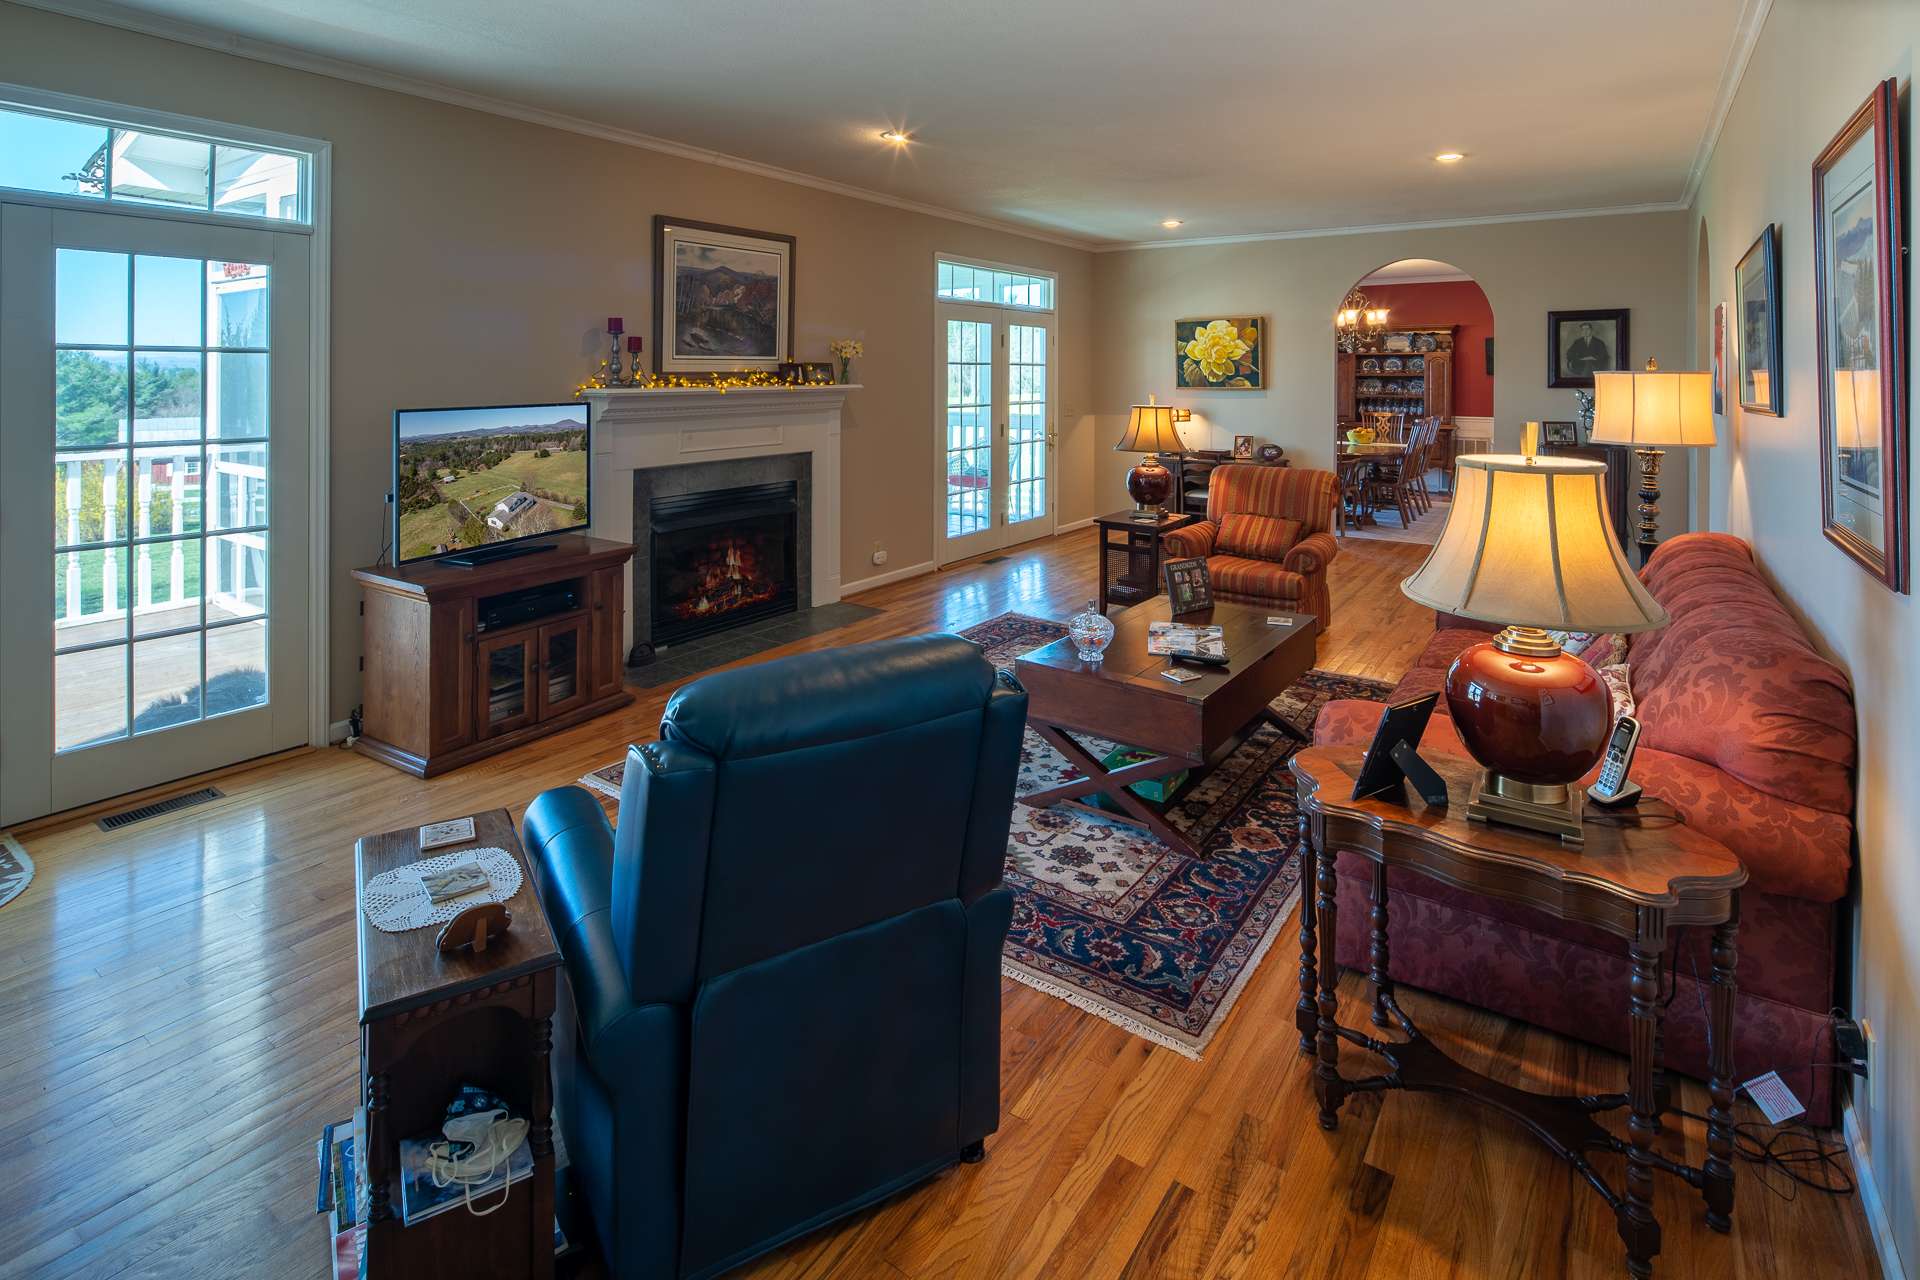 The spacious living area features a gas log fireplace and two sets of French doors to access the screened porch and outdoors.